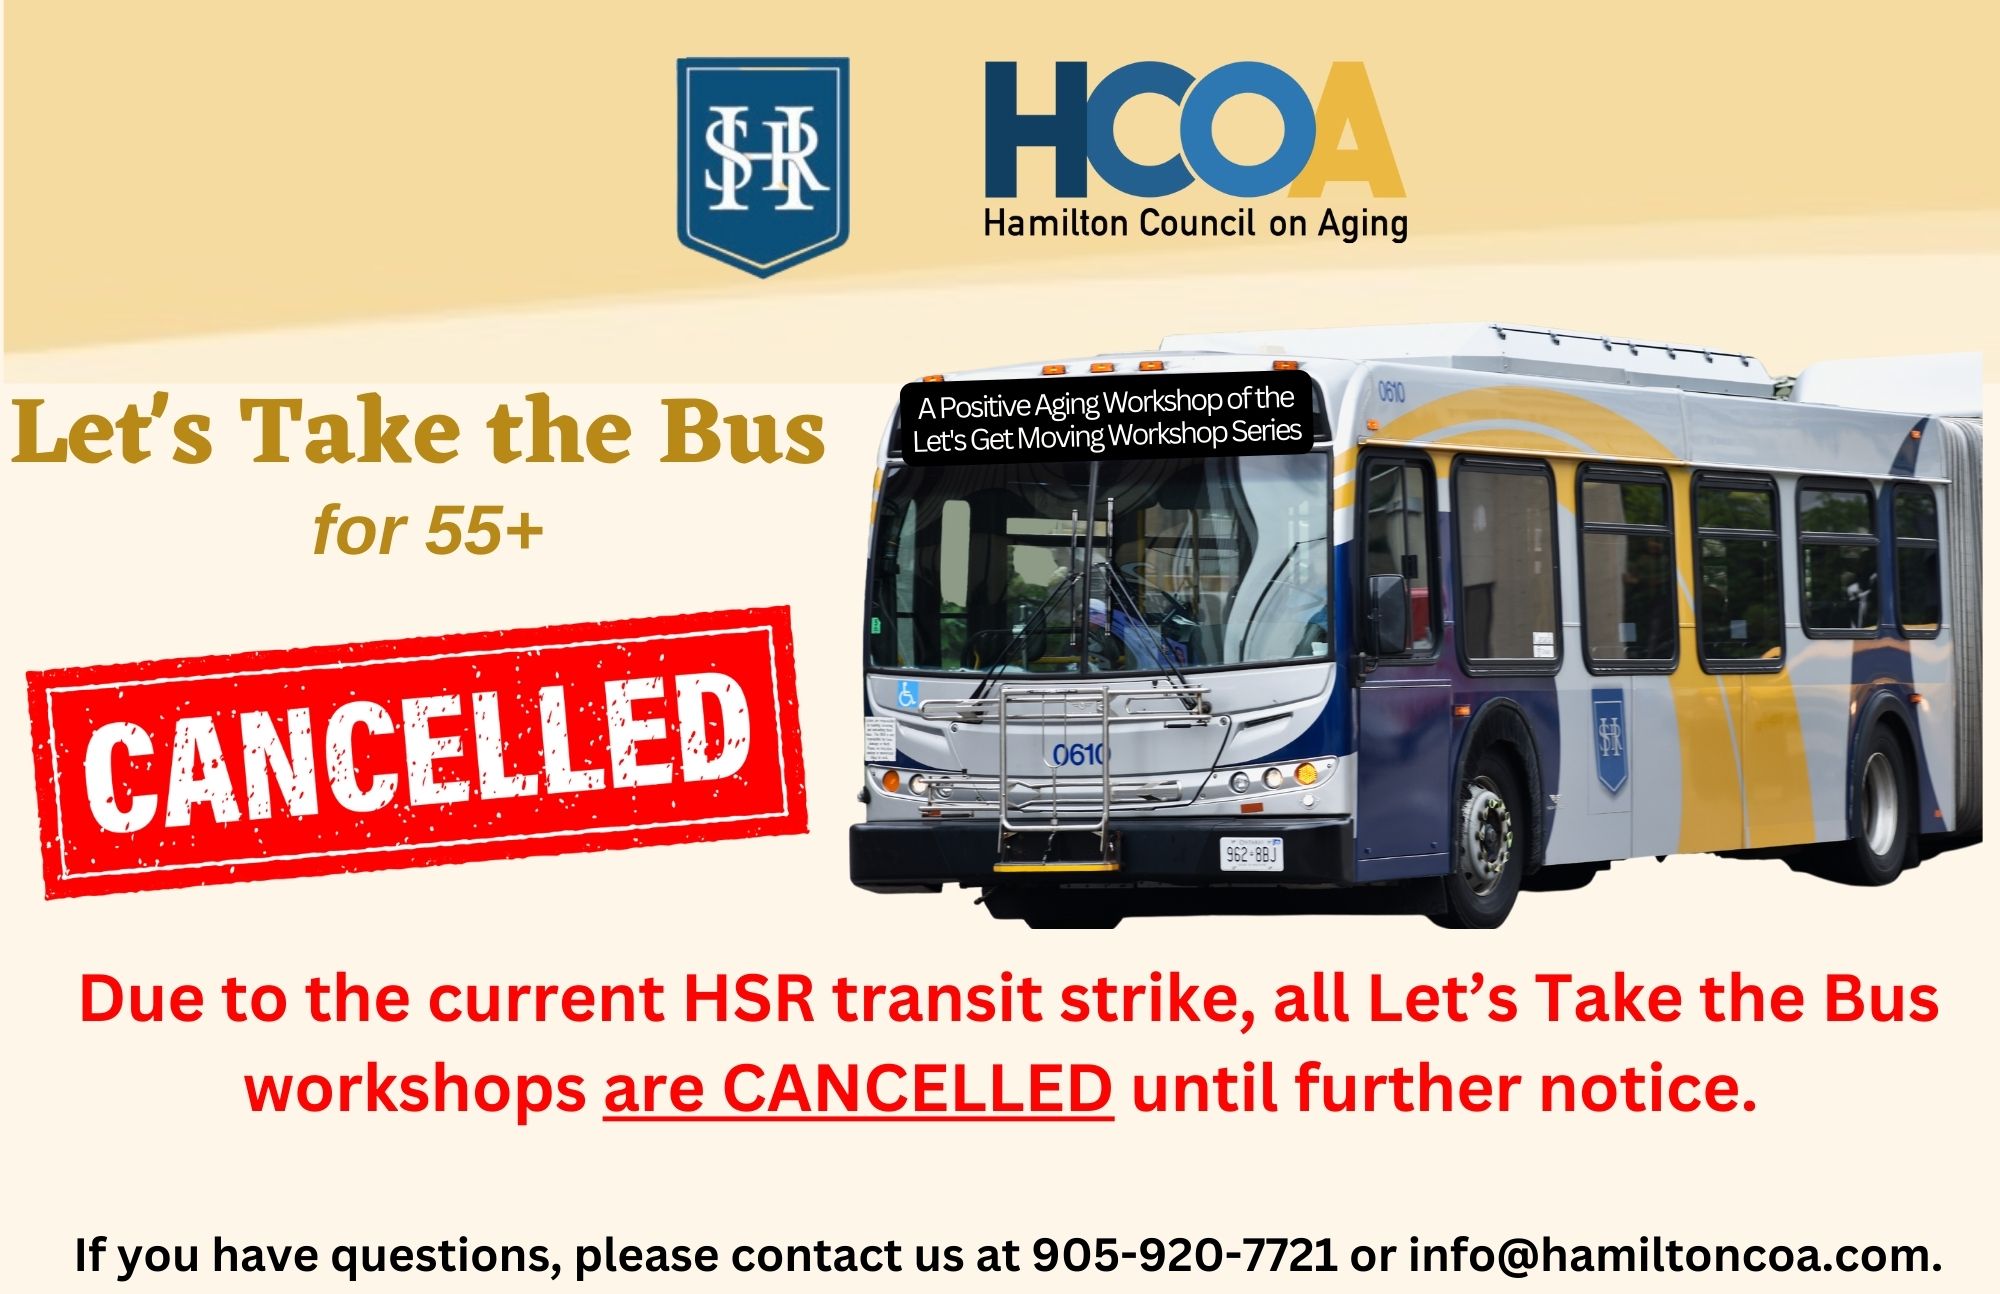 Notice: Let's Take the Bus workshops cancelled until further notice